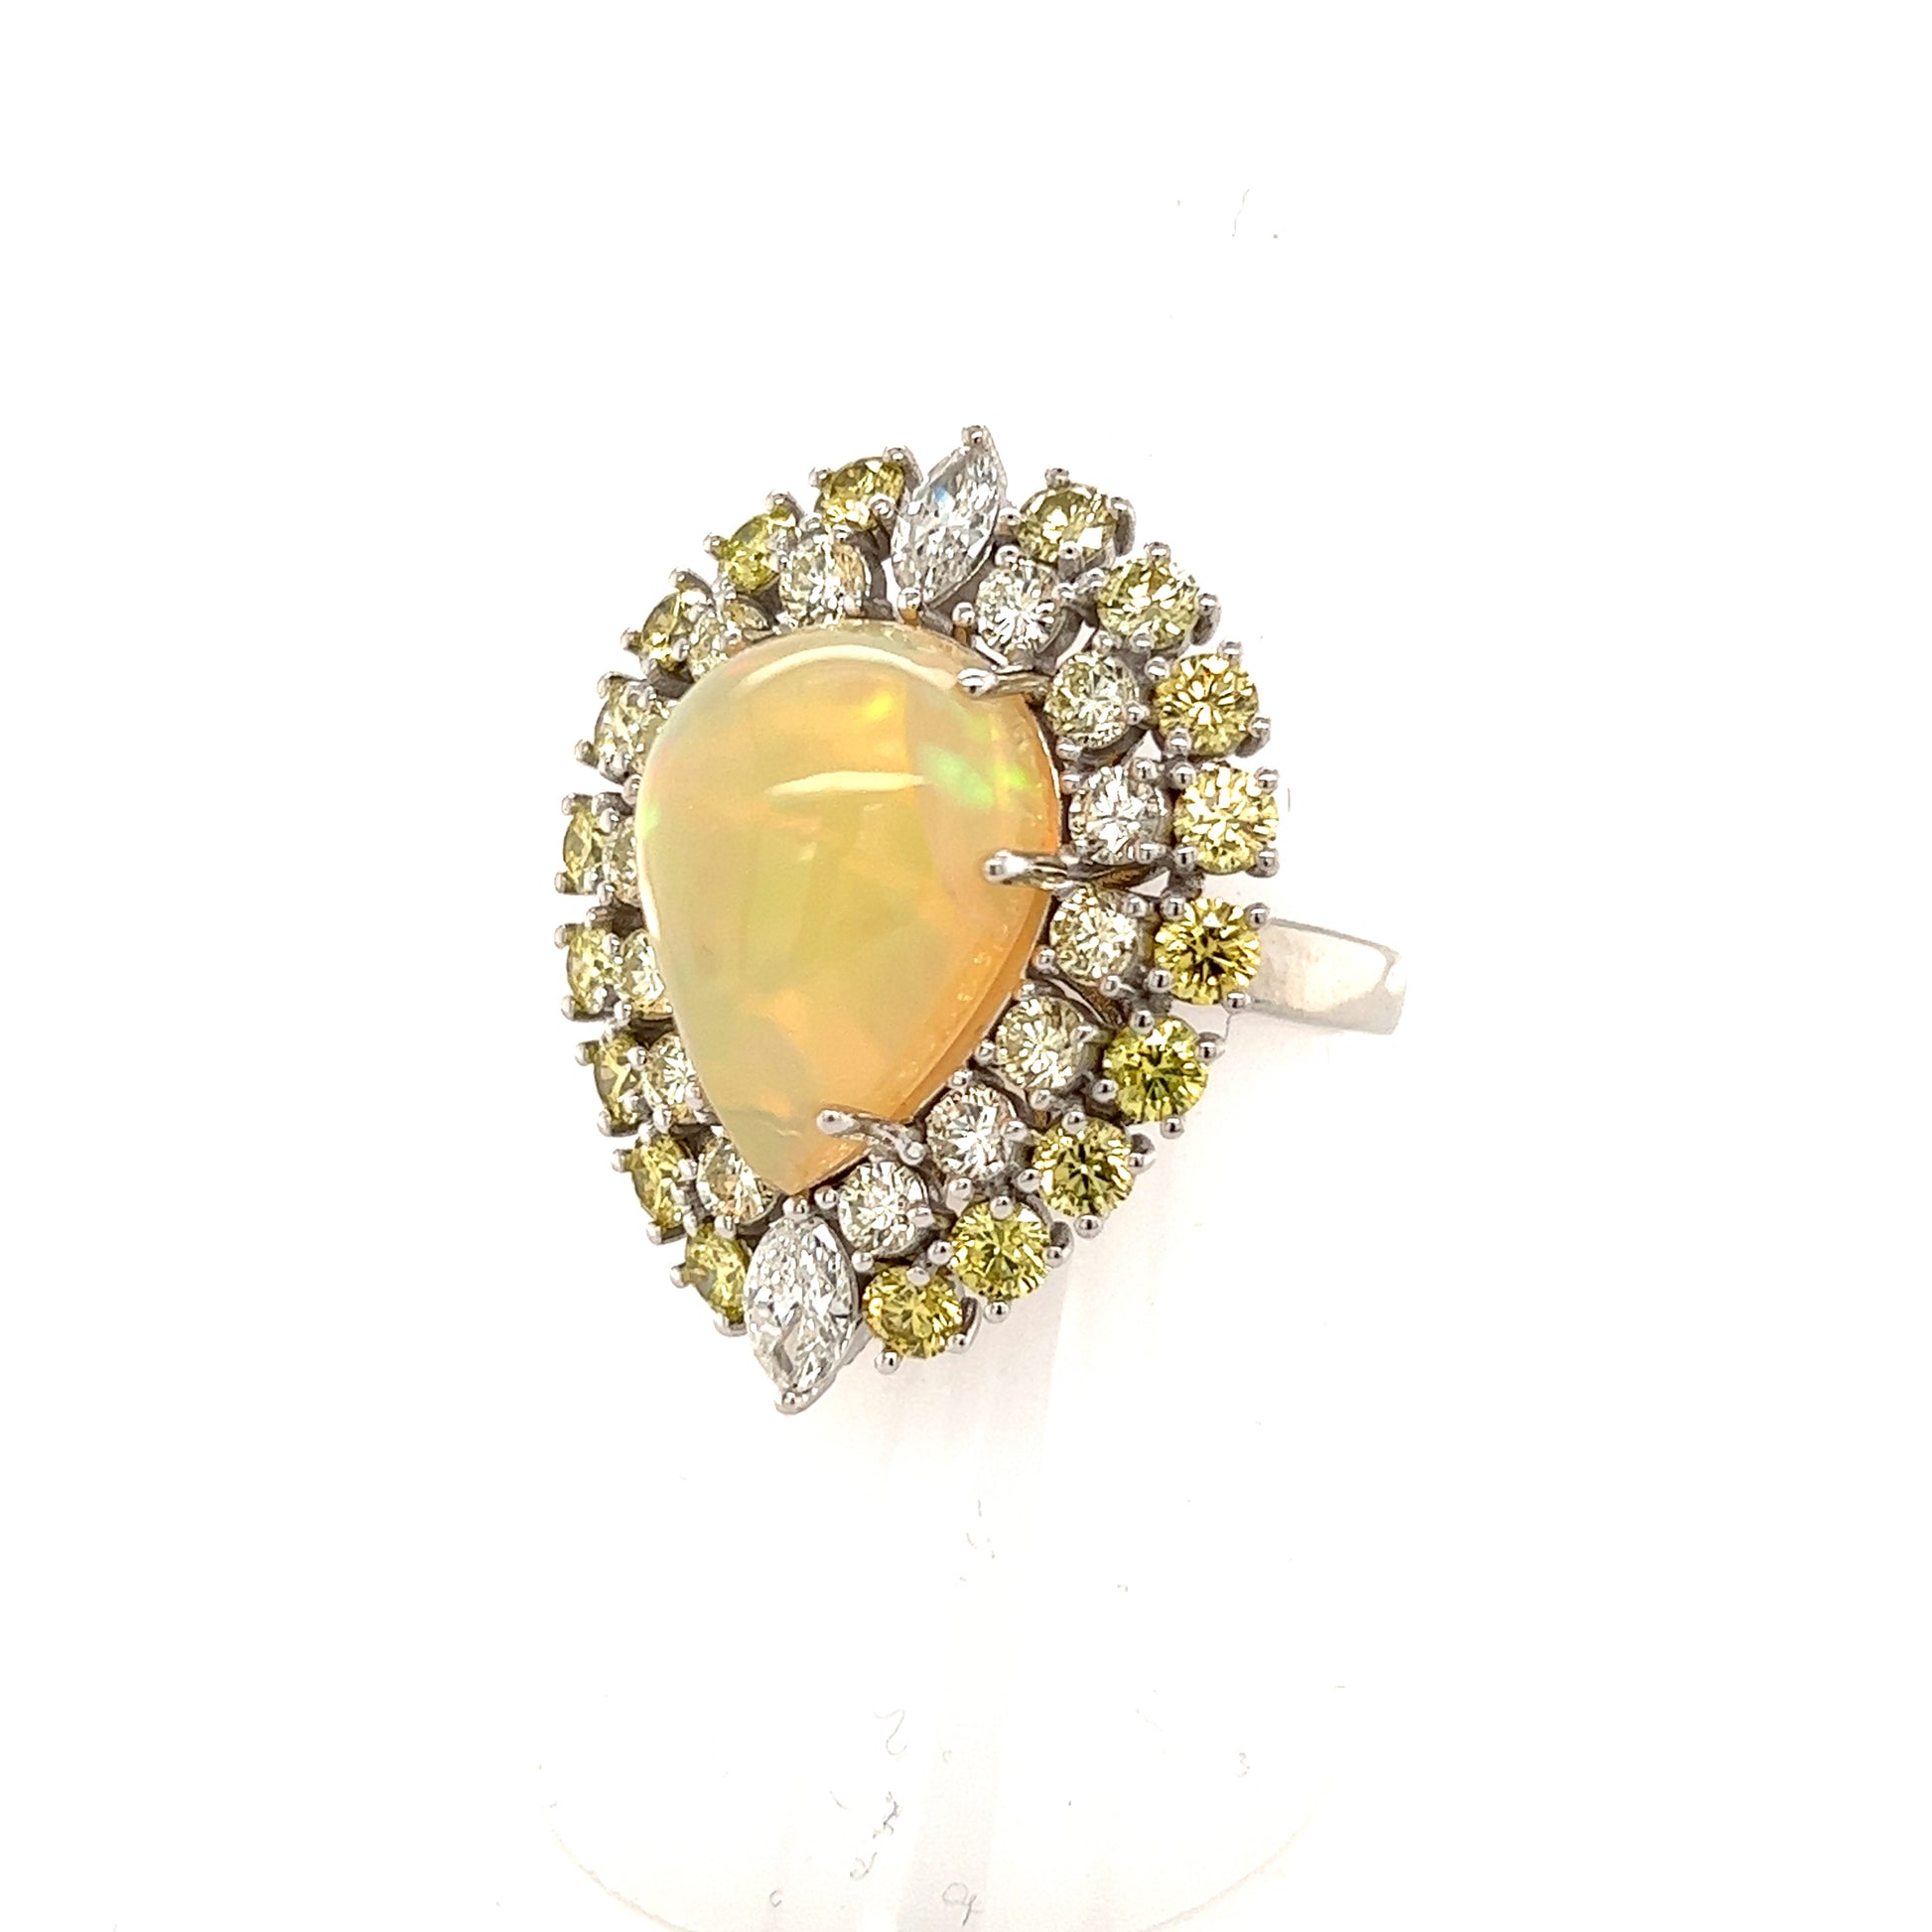 Natural White Opal Diamond Ring 14k Gold 11 TCW Certified $12,950 210739 - Certified Estate Jewelry